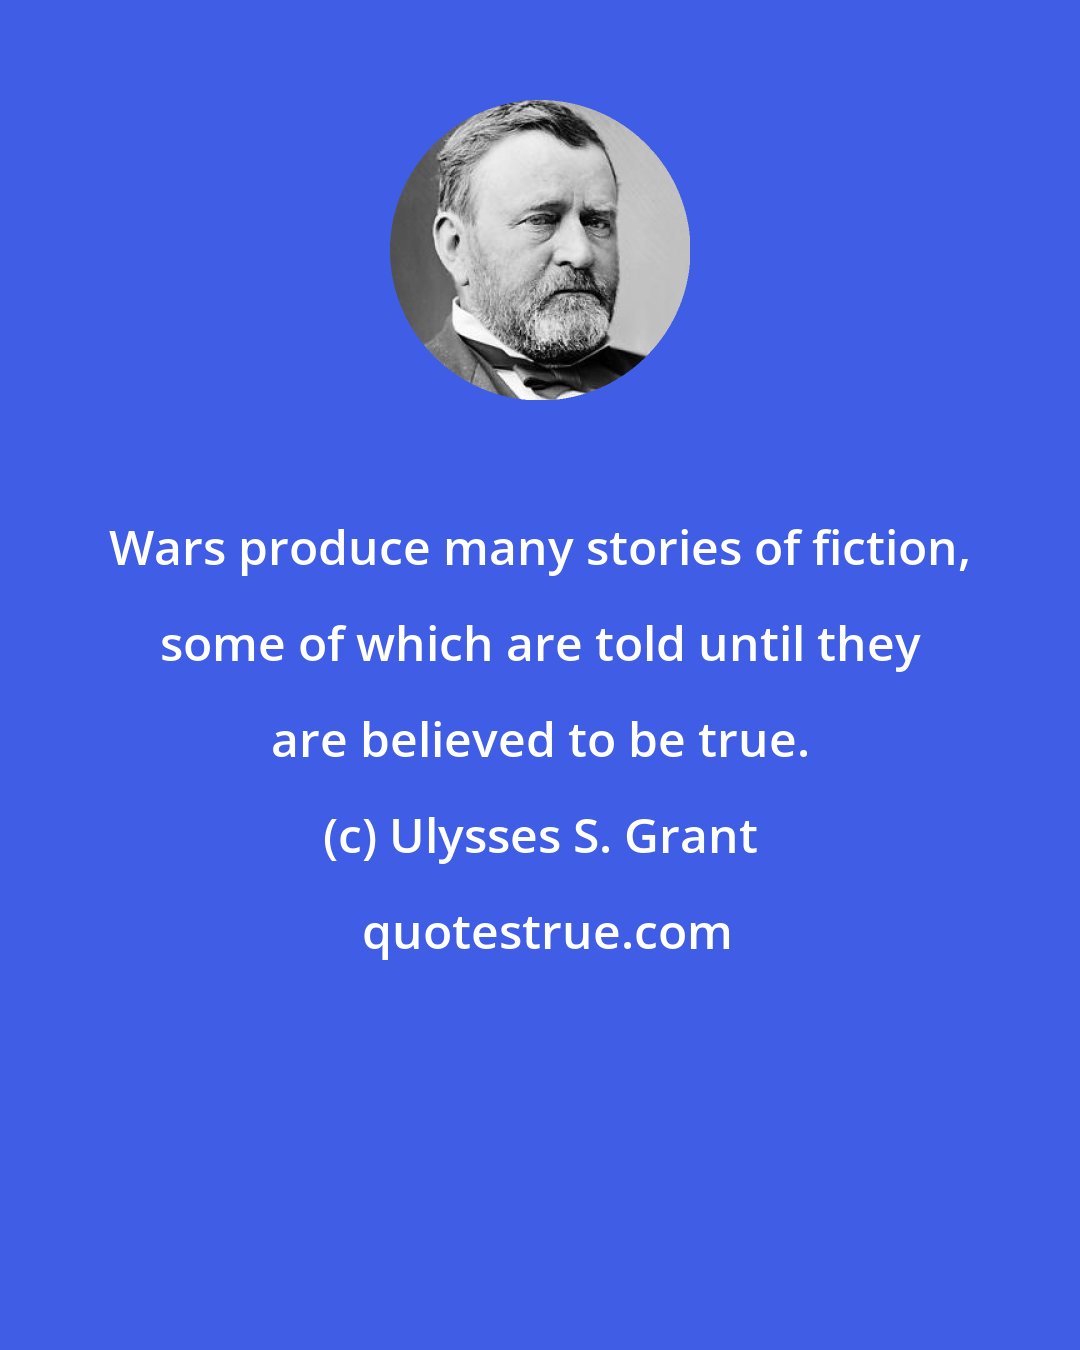 Ulysses S. Grant: Wars produce many stories of fiction, some of which are told until they are believed to be true.